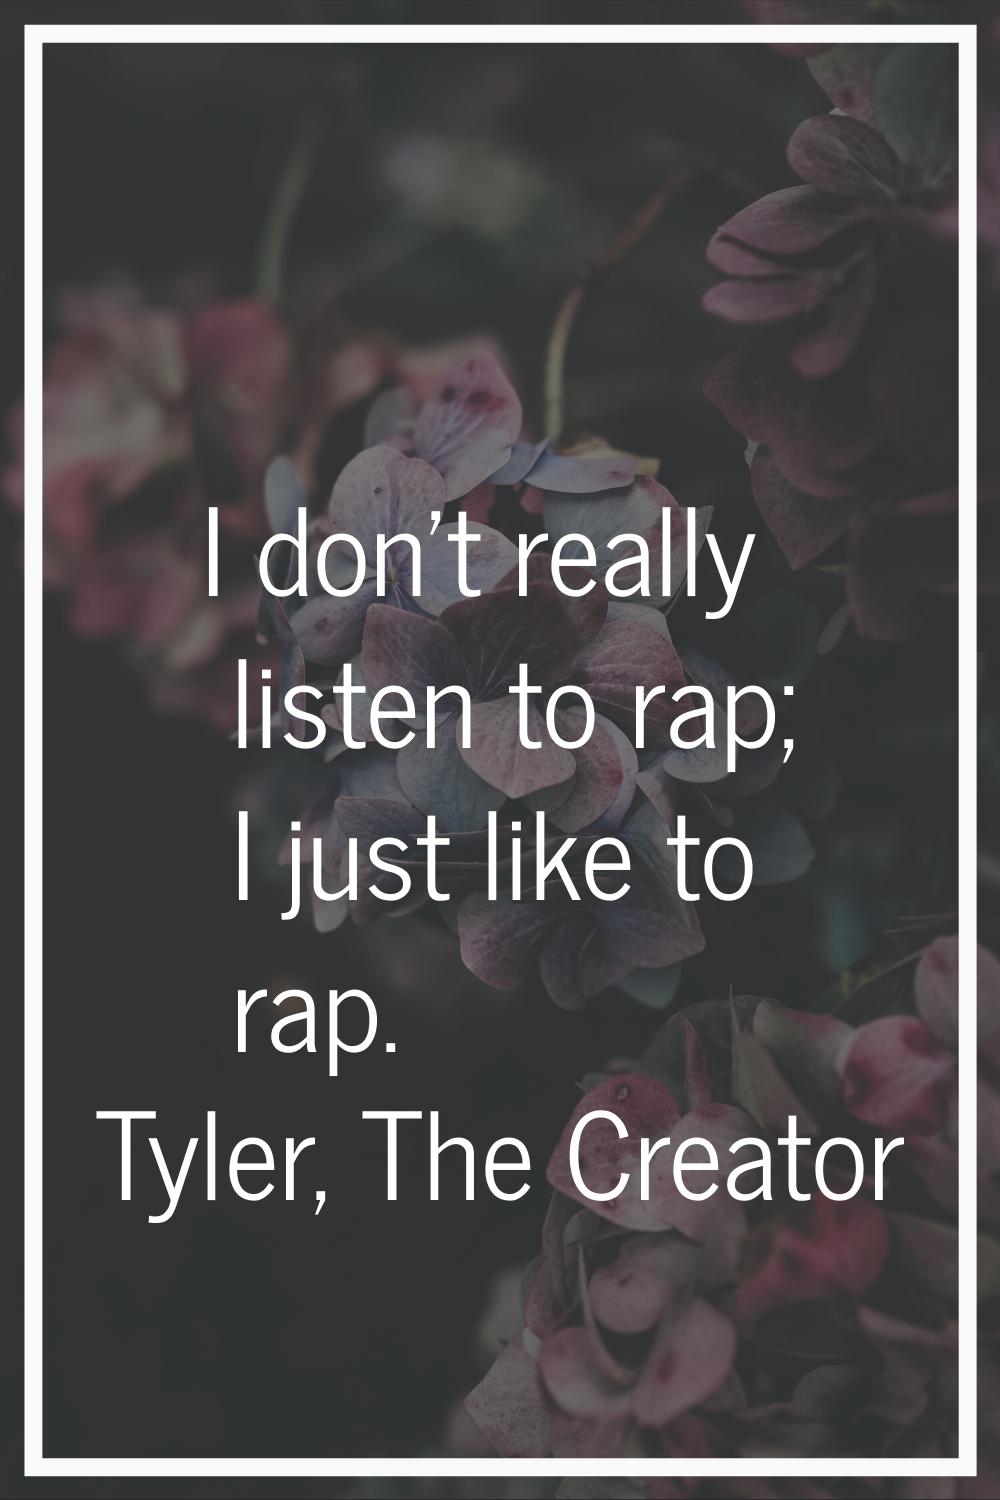 I don't really listen to rap; I just like to rap.